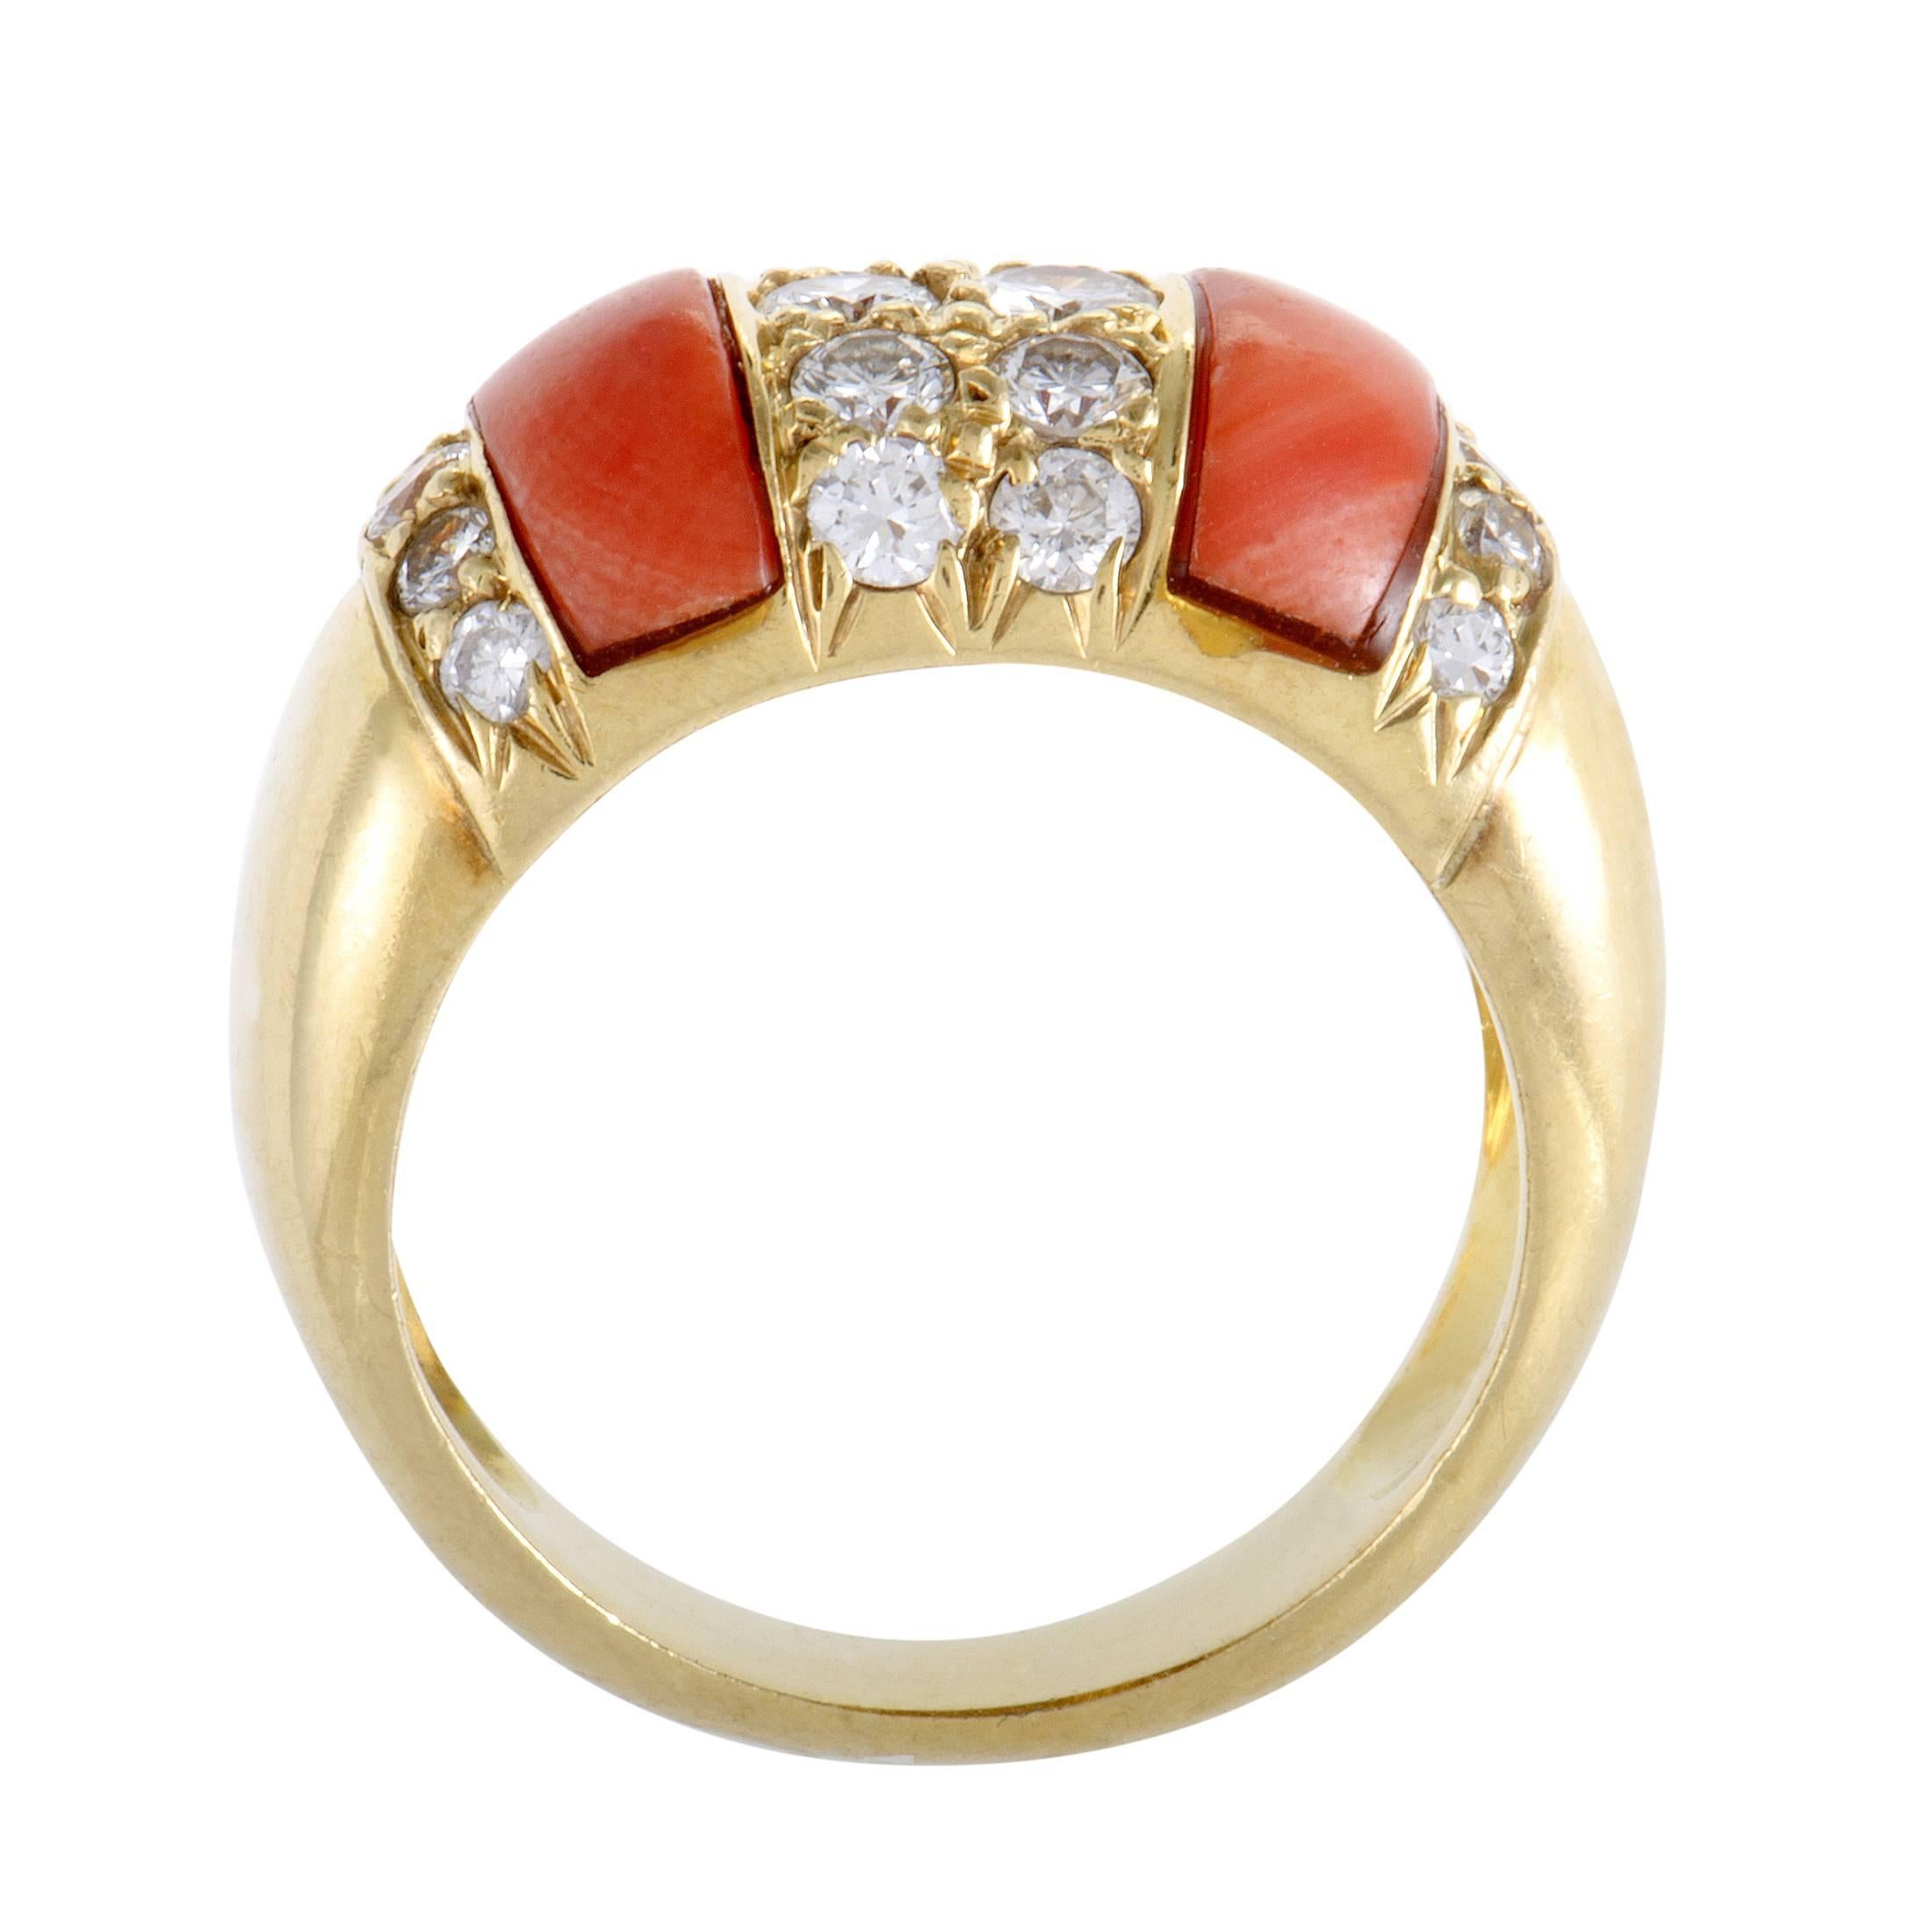 Neatly inlaid amidst a scintillating arrangement of glistening diamonds amounting to 1.00 carat, the striking coral stones exude their passionate color against the radiant 18K yellow gold in this vivacious and tasteful ring.
Ring Size: 6.75
Band